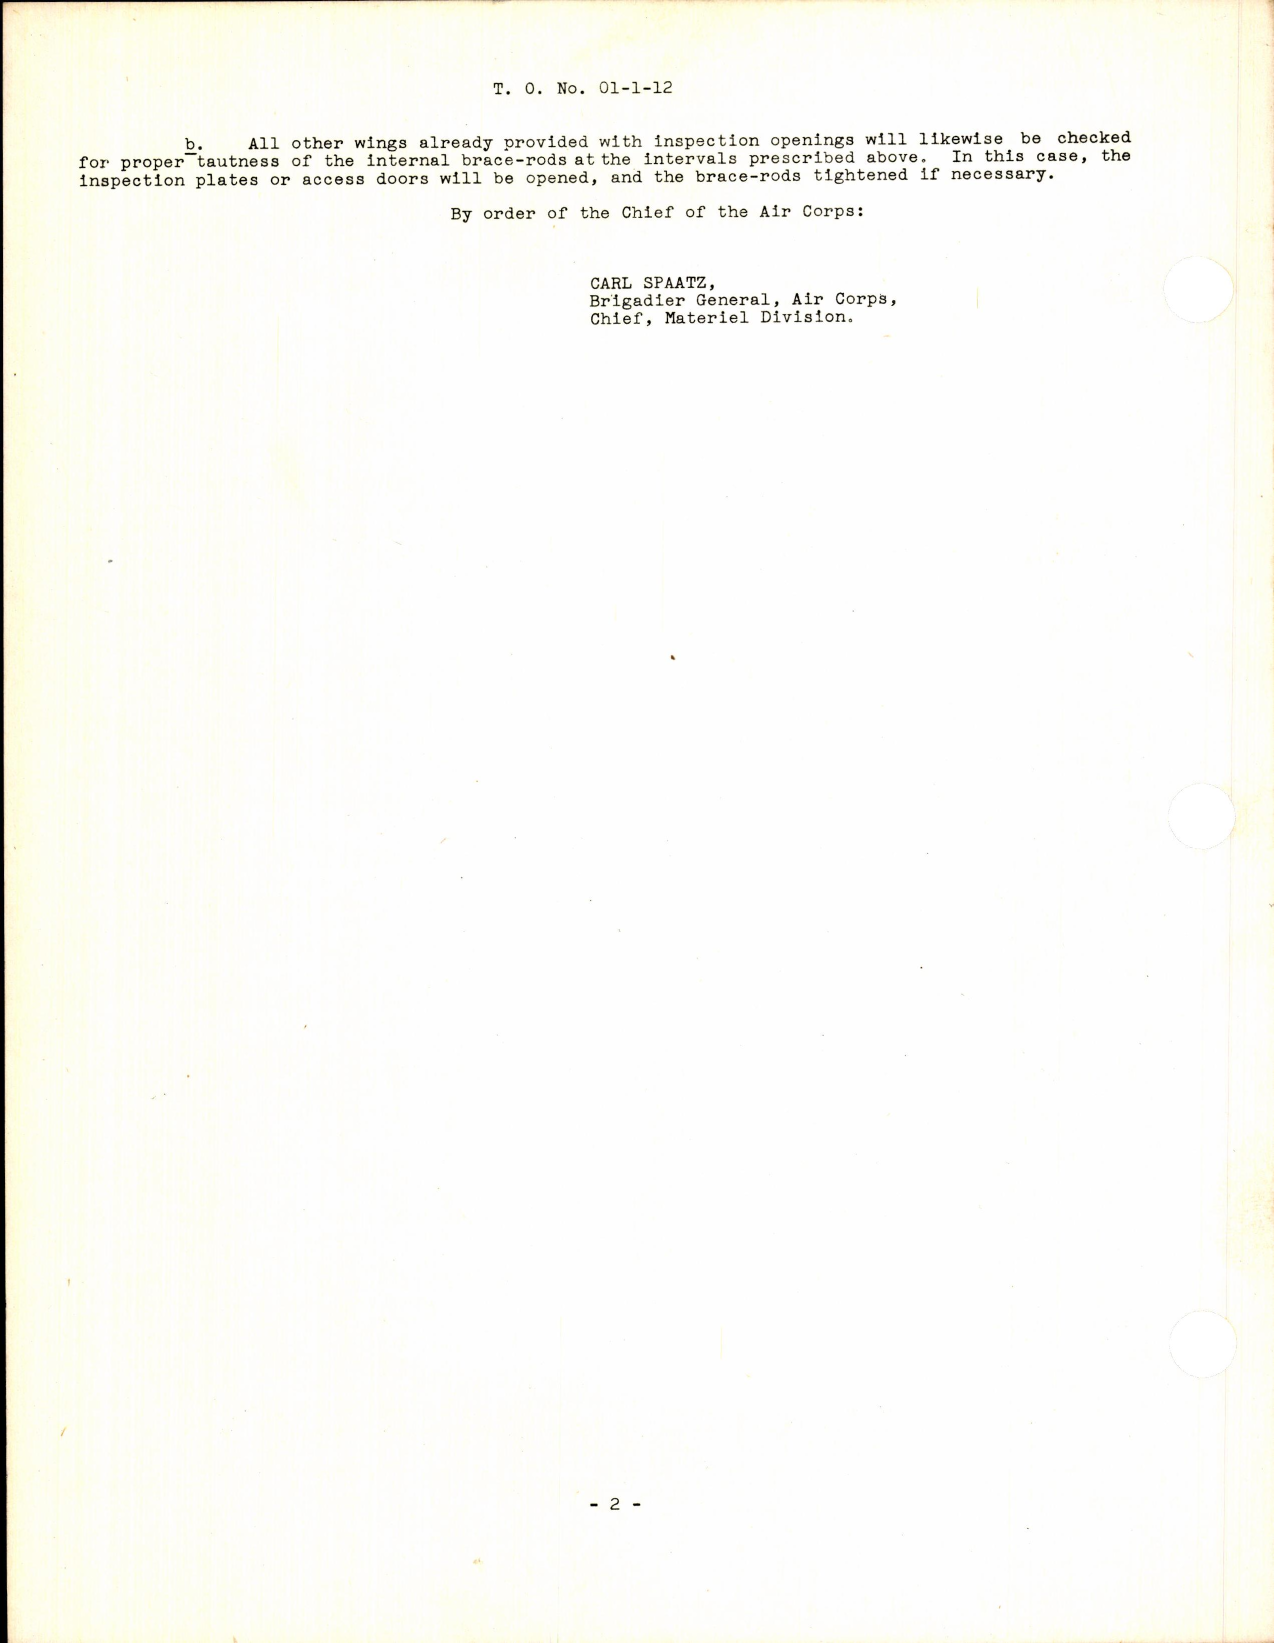 Sample page  2 from AirCorps Library document: Airplanes and Spare Parts; Inspection of Airfoils